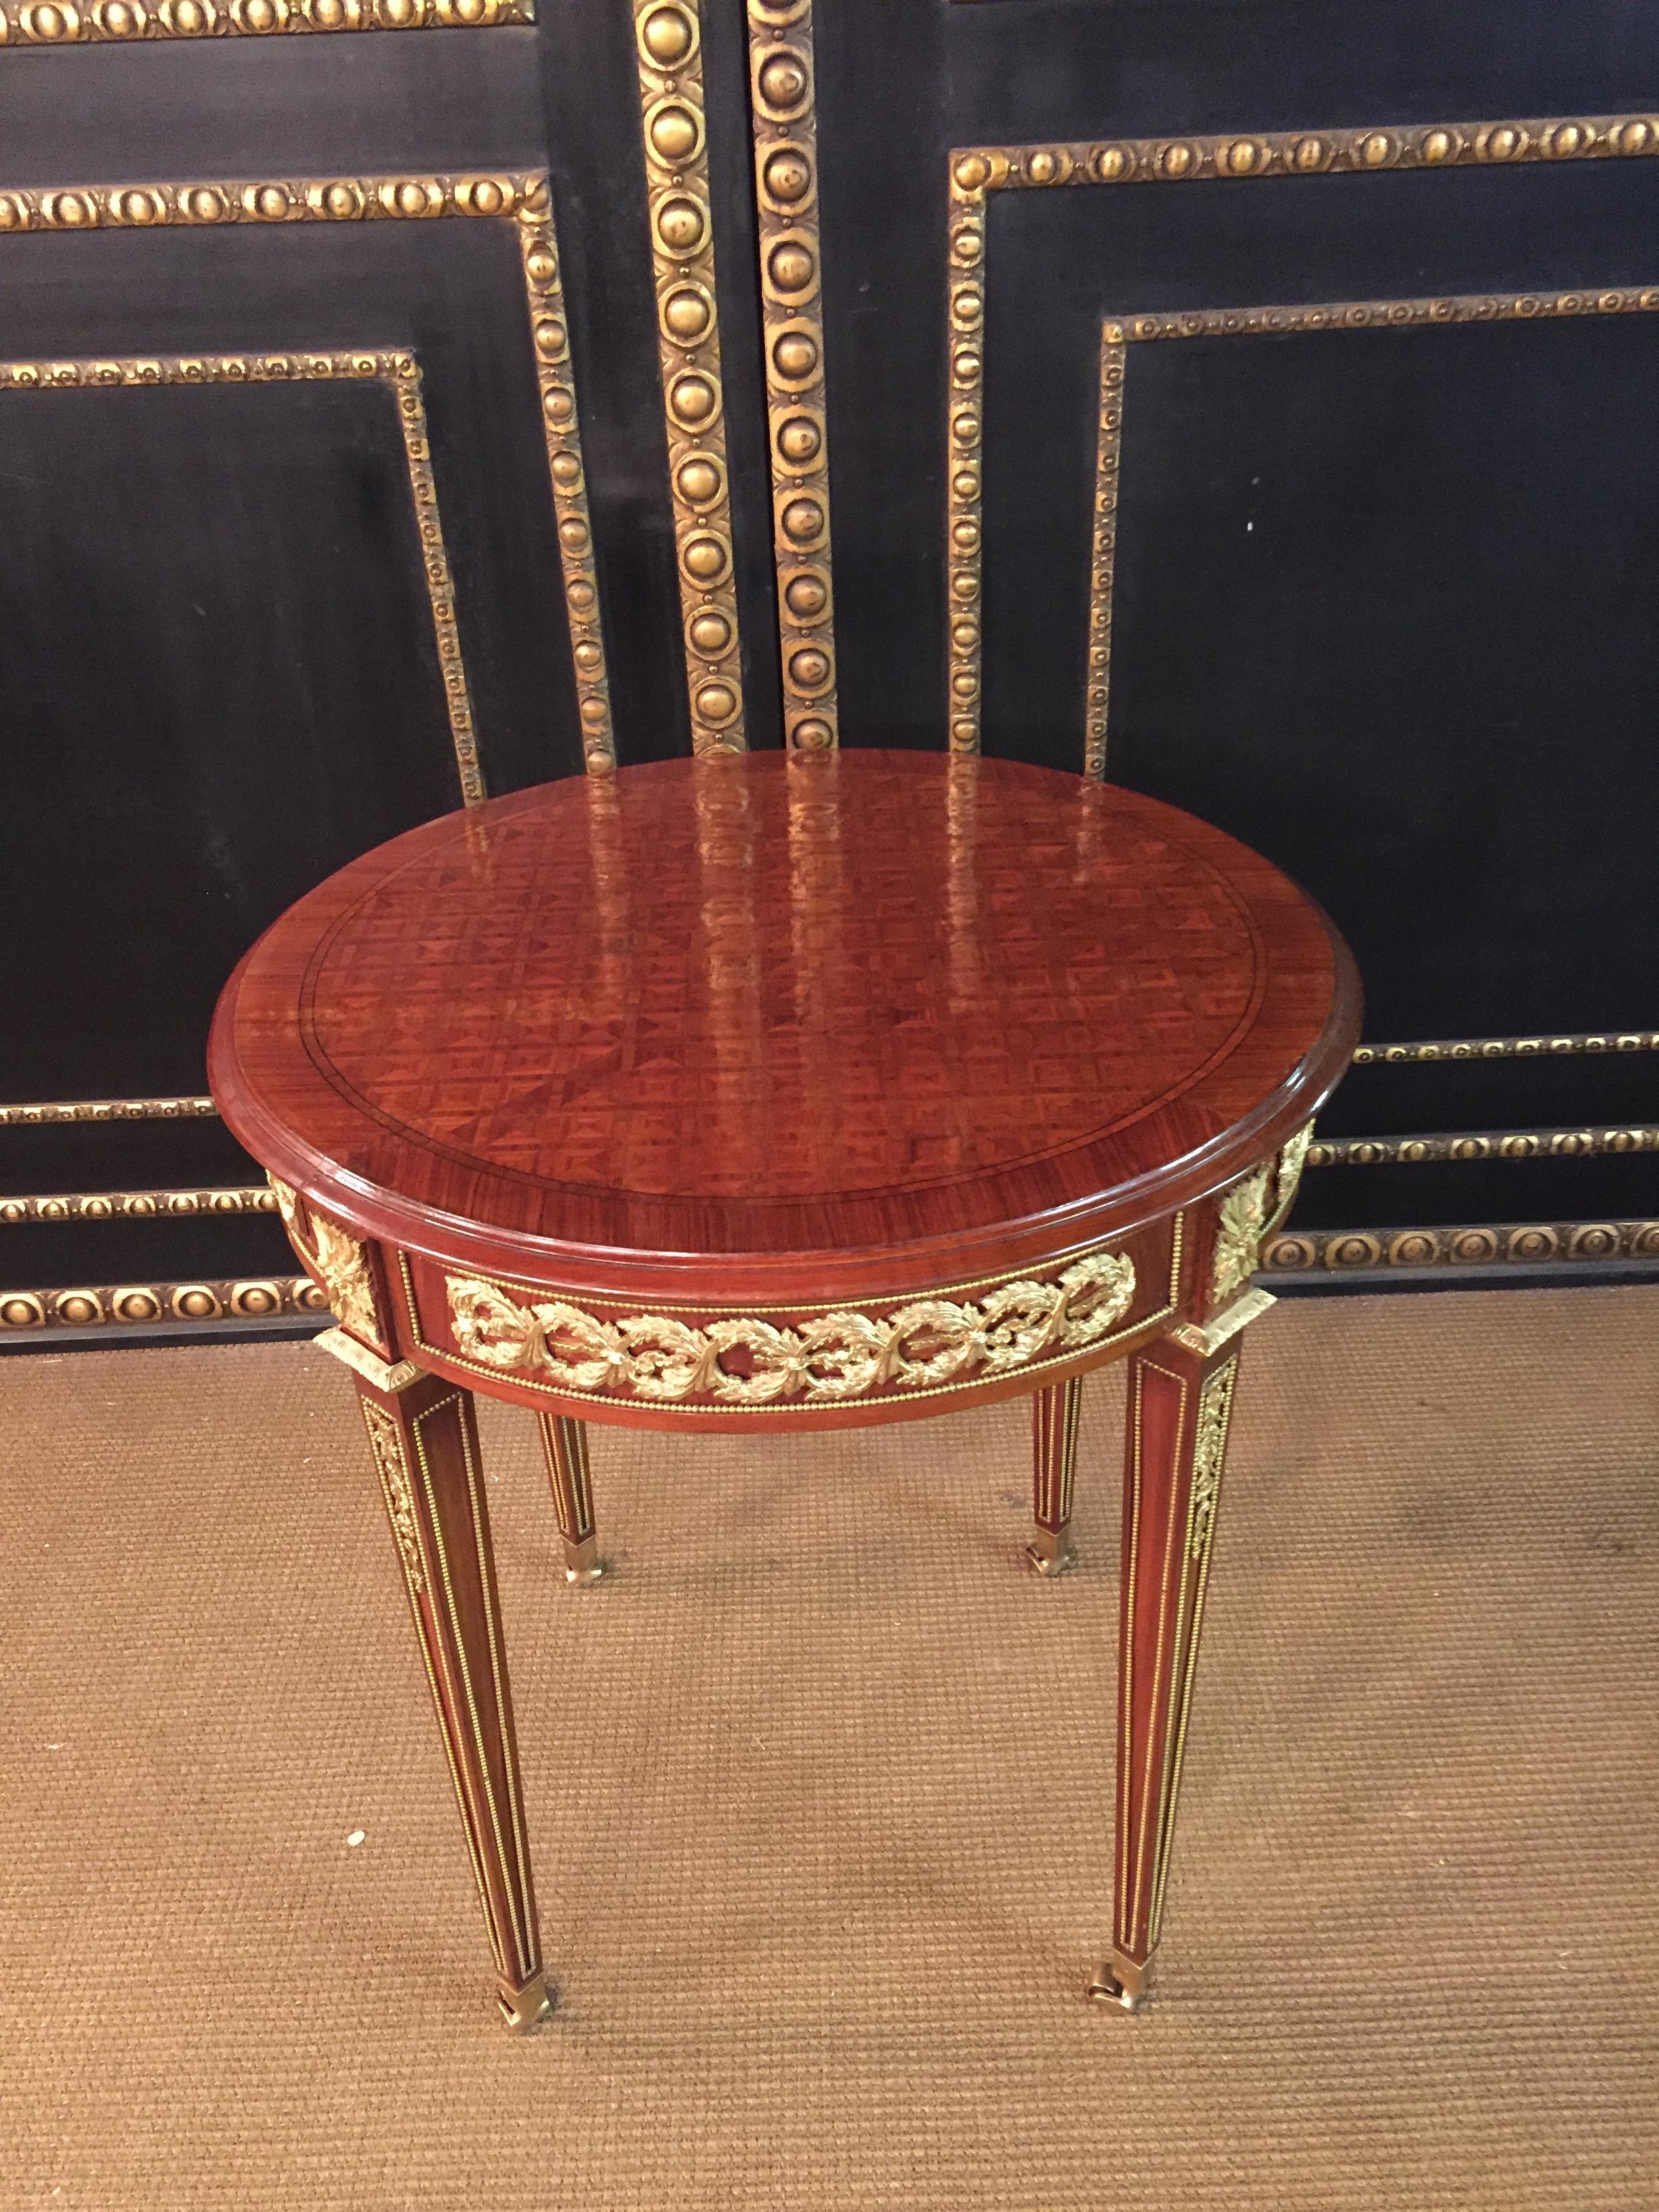 Bronzed 20th Century Louis XVI Style with Round Platte with Inlays French Table